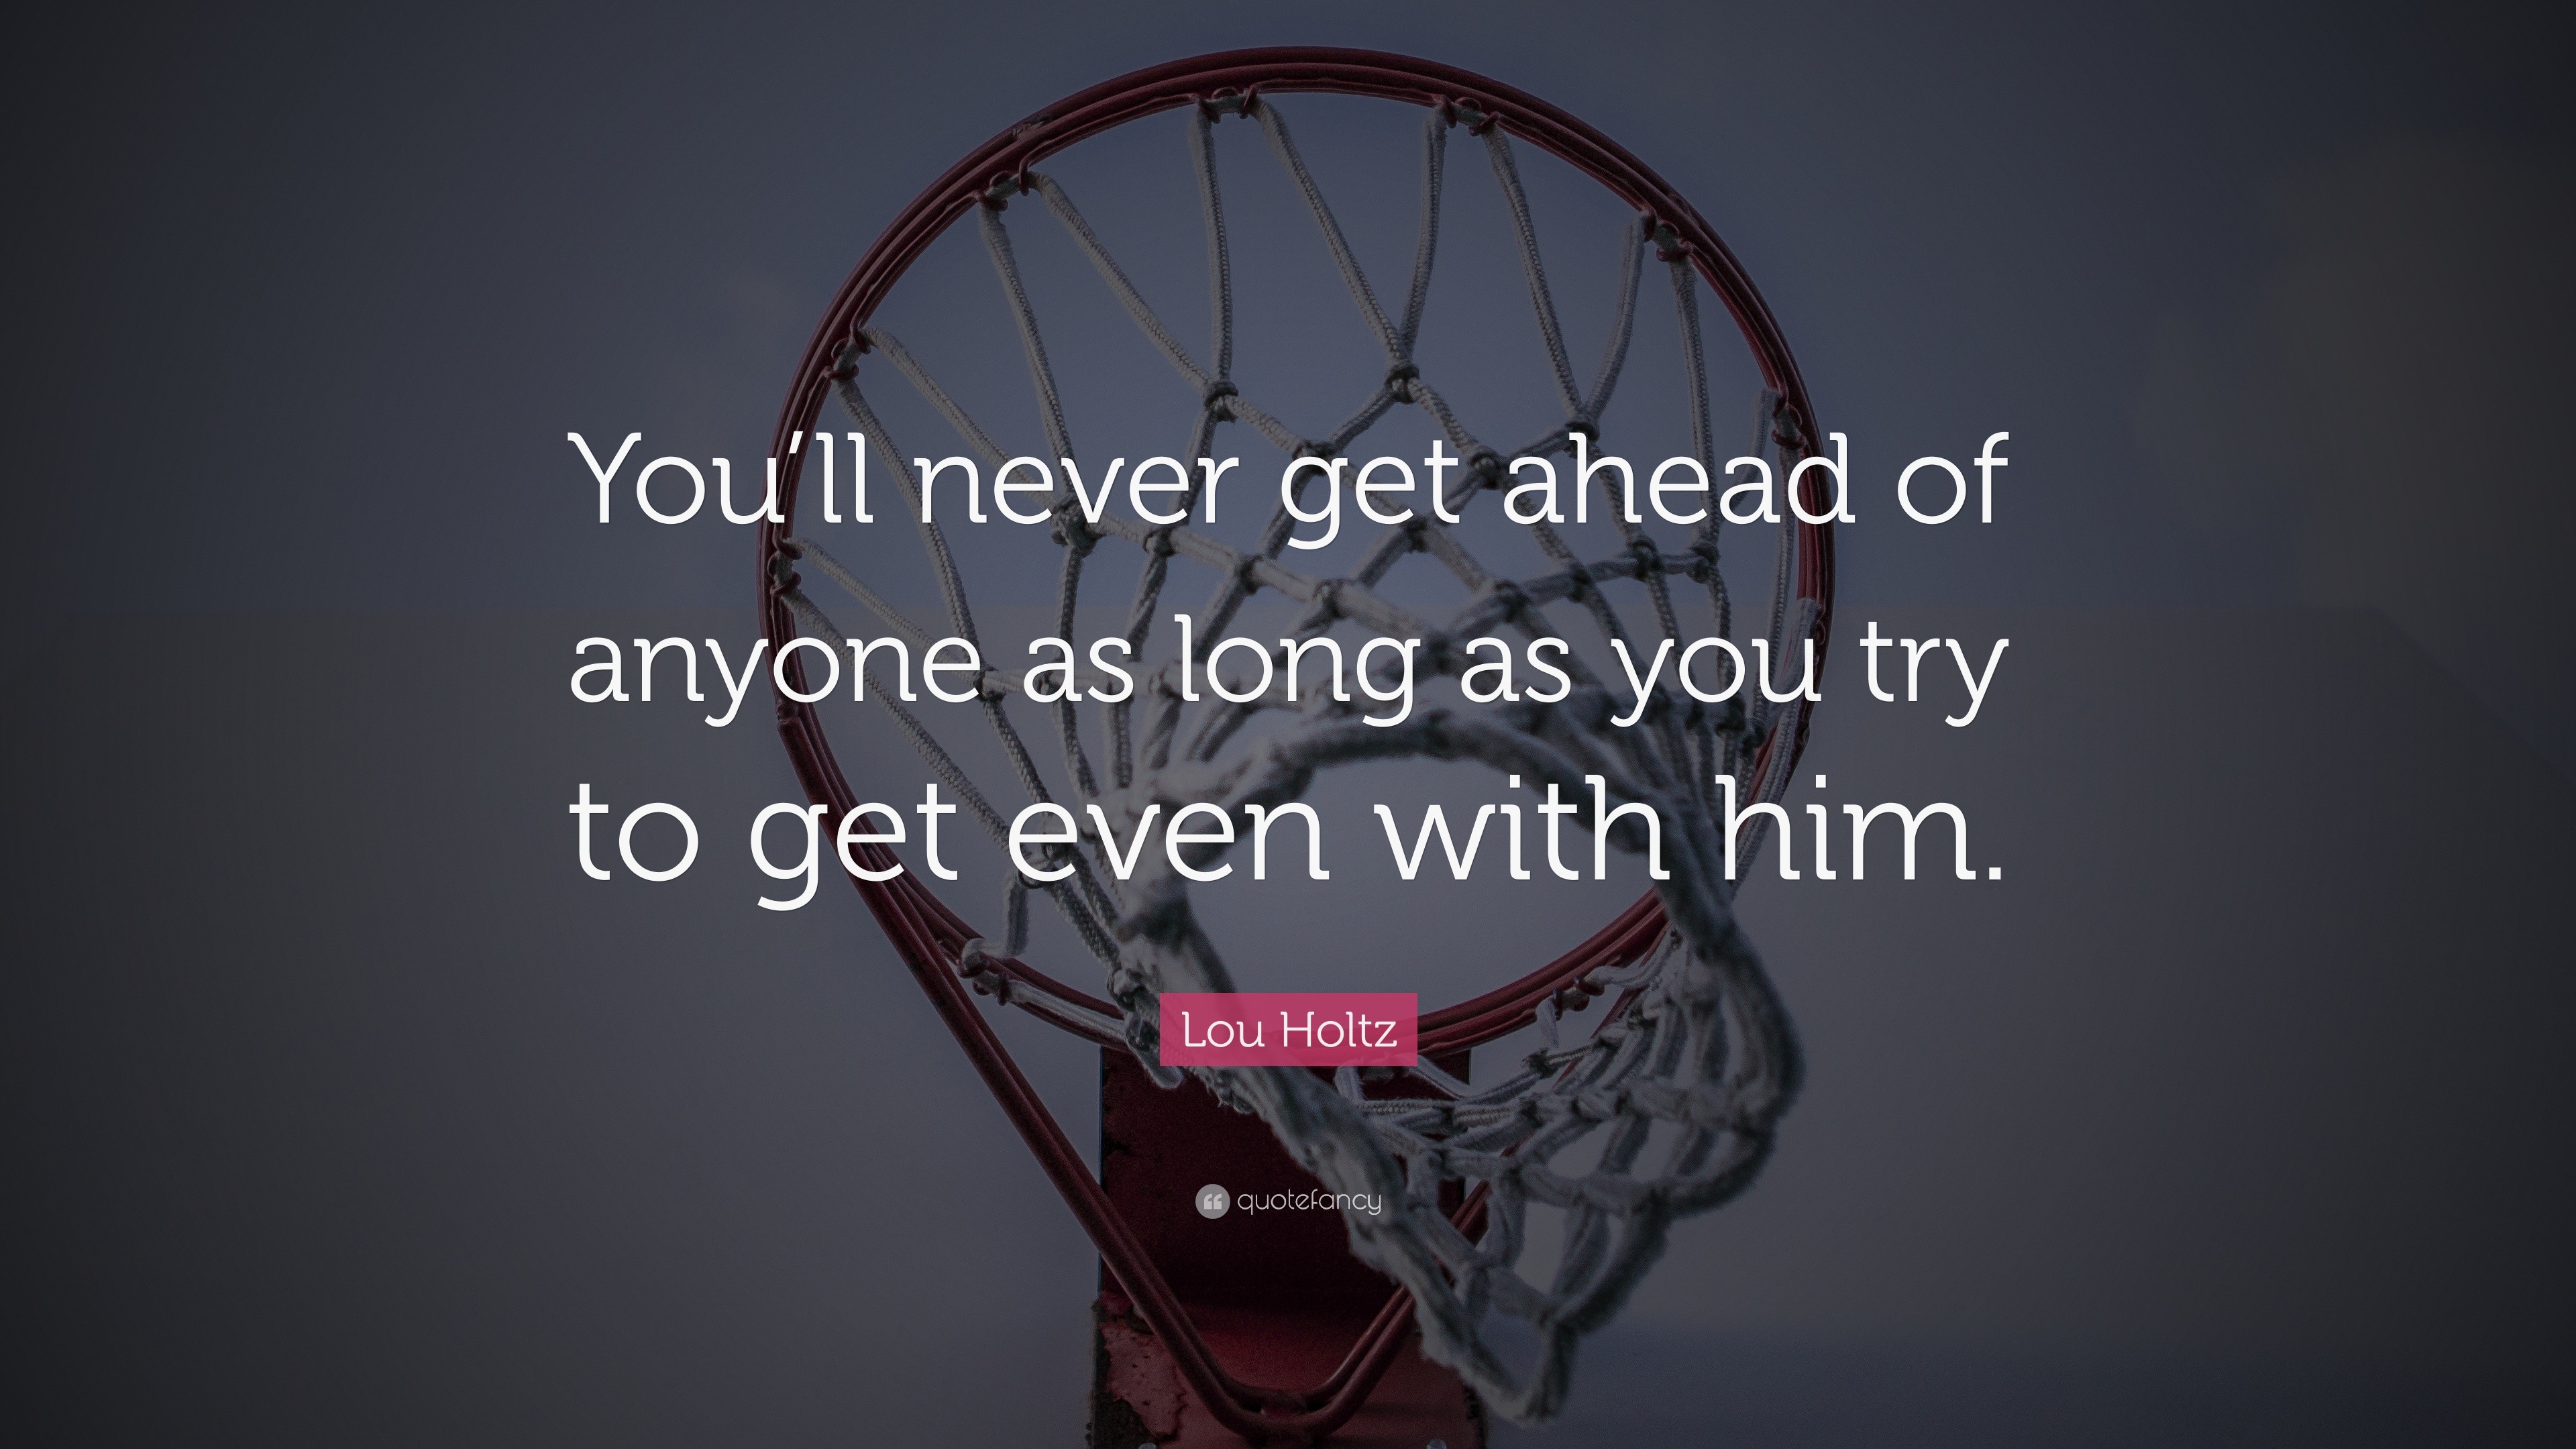 Lou Holtz Quote: “You’ll never get ahead of anyone as long as you try ...